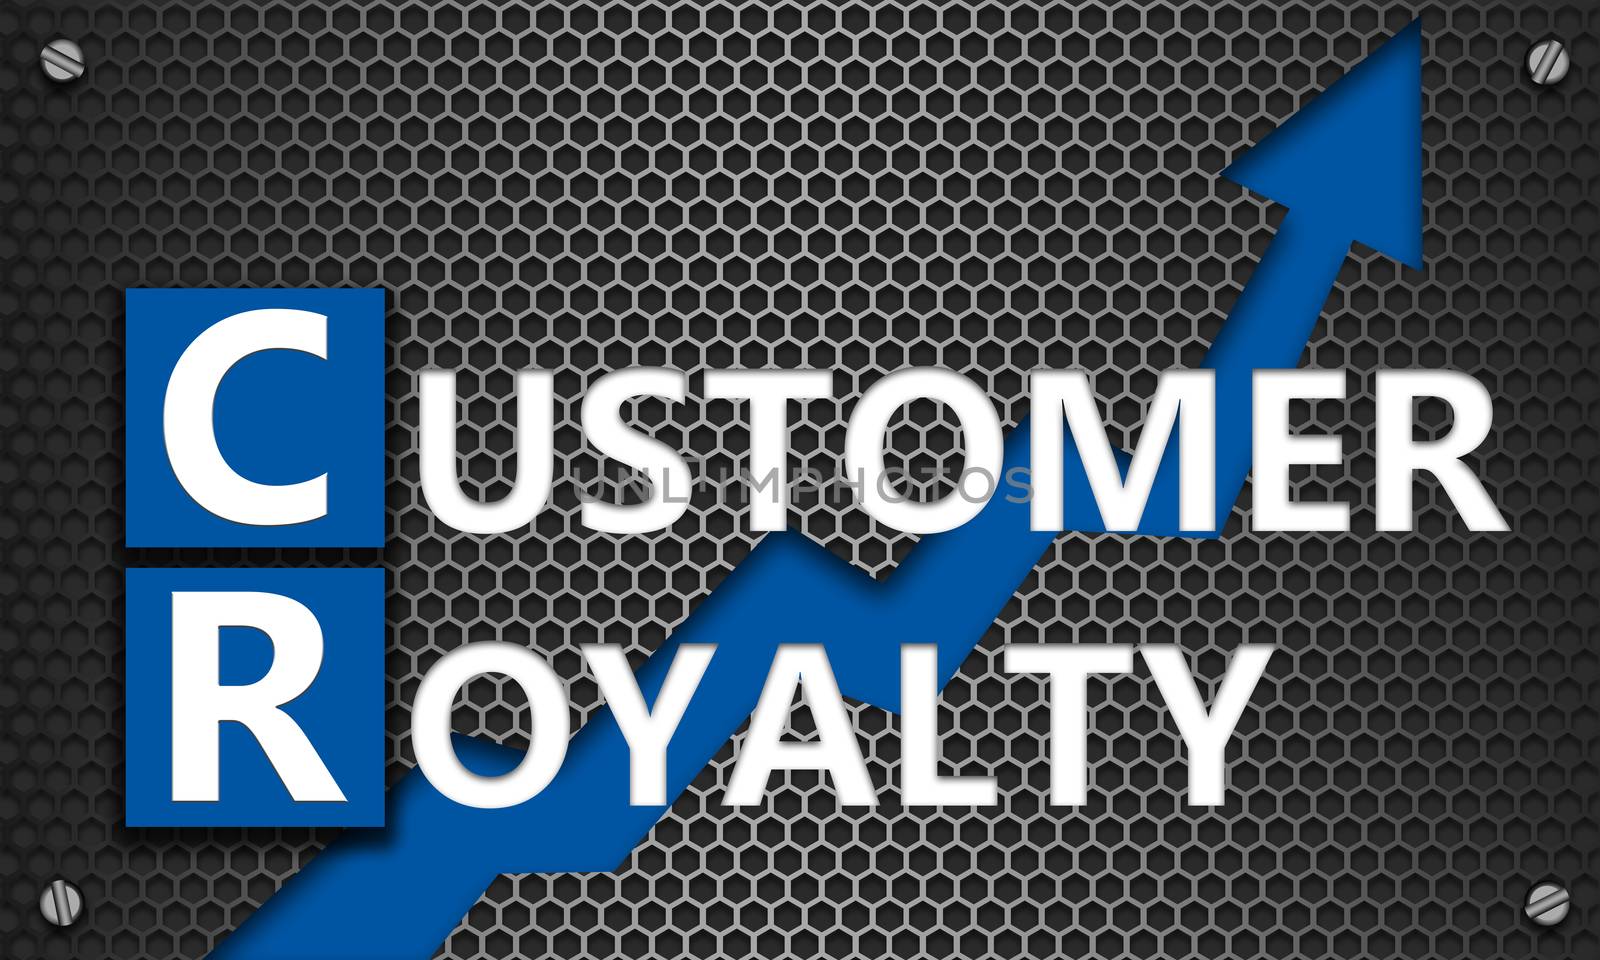 Customer Loyalty concept on mesh hexagon background by tang90246